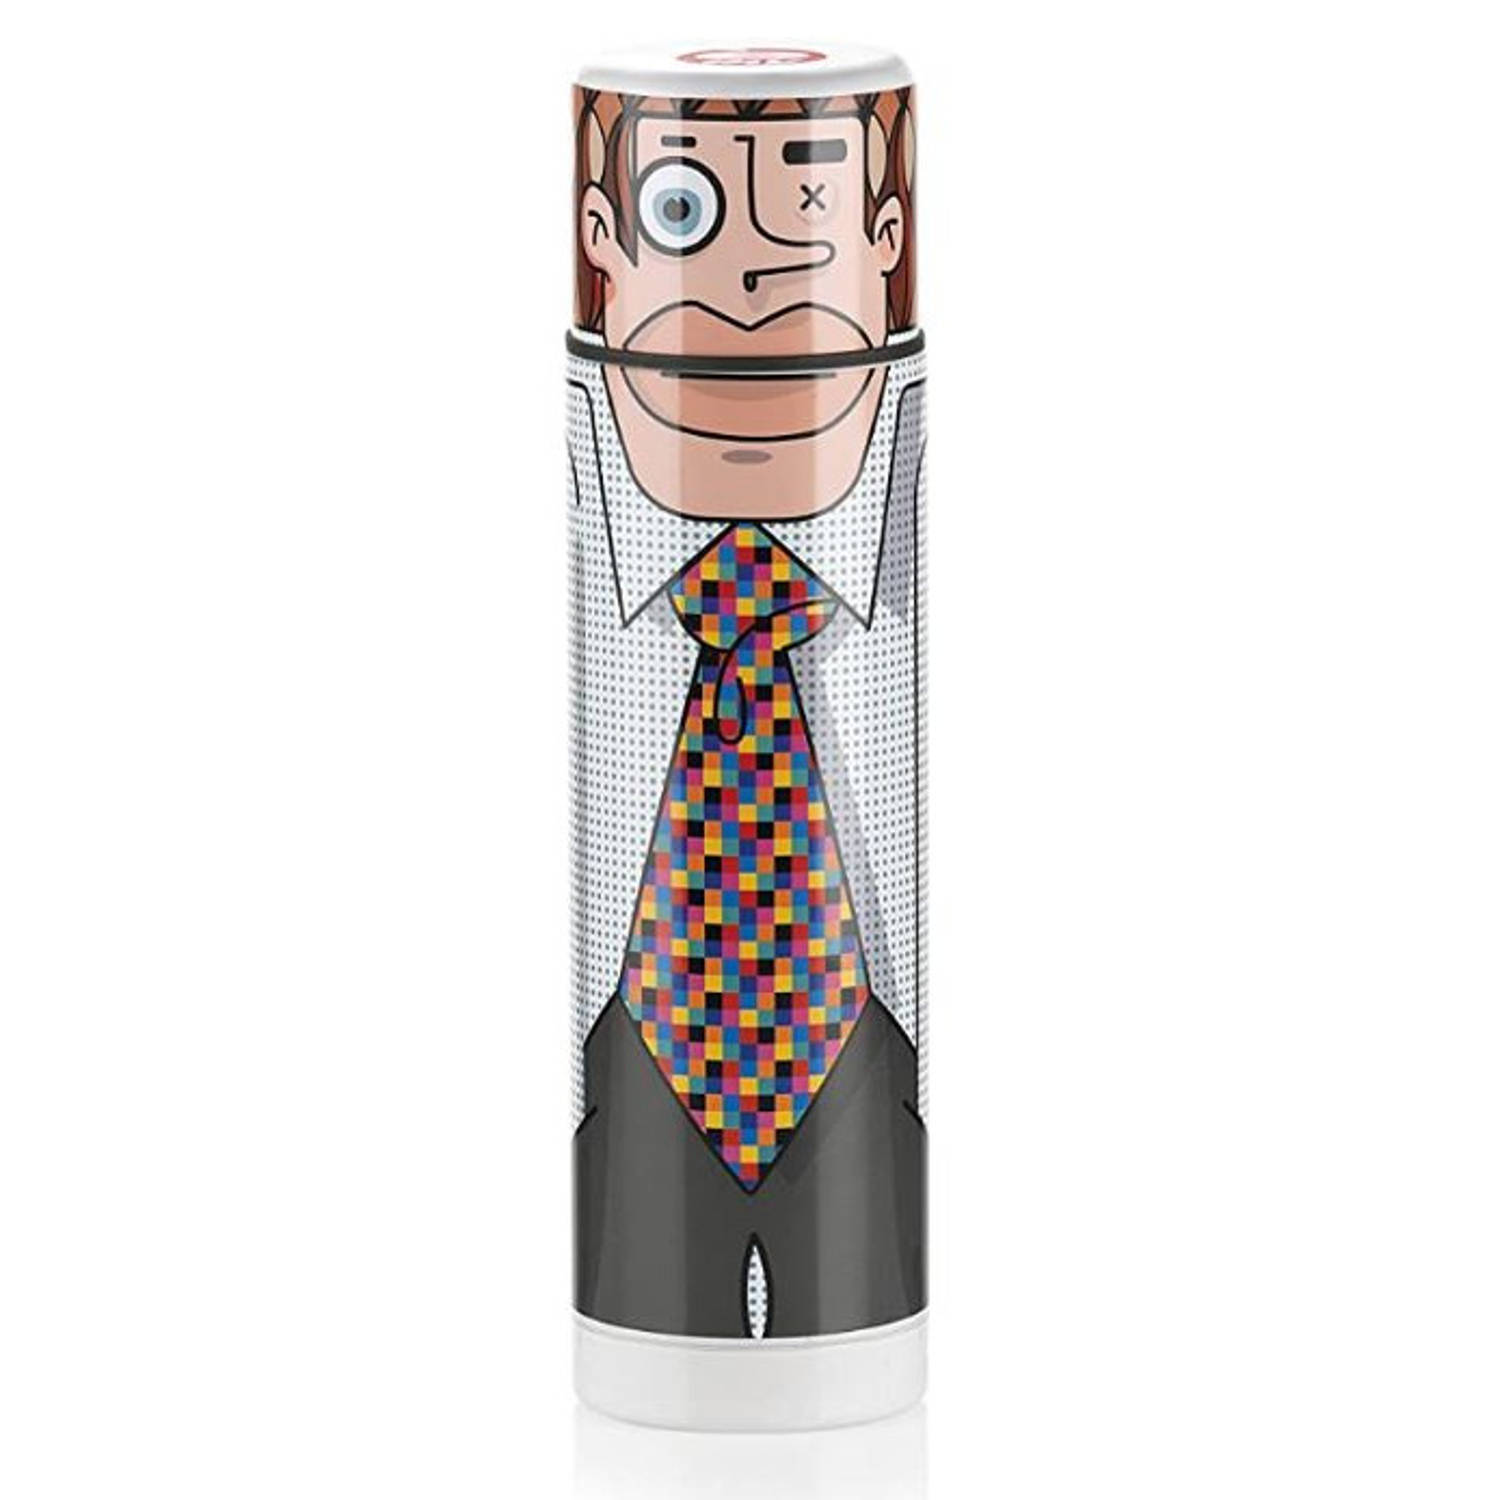 E-my thermosbeker mister Fred 500 ml 25 cm RVS grijs